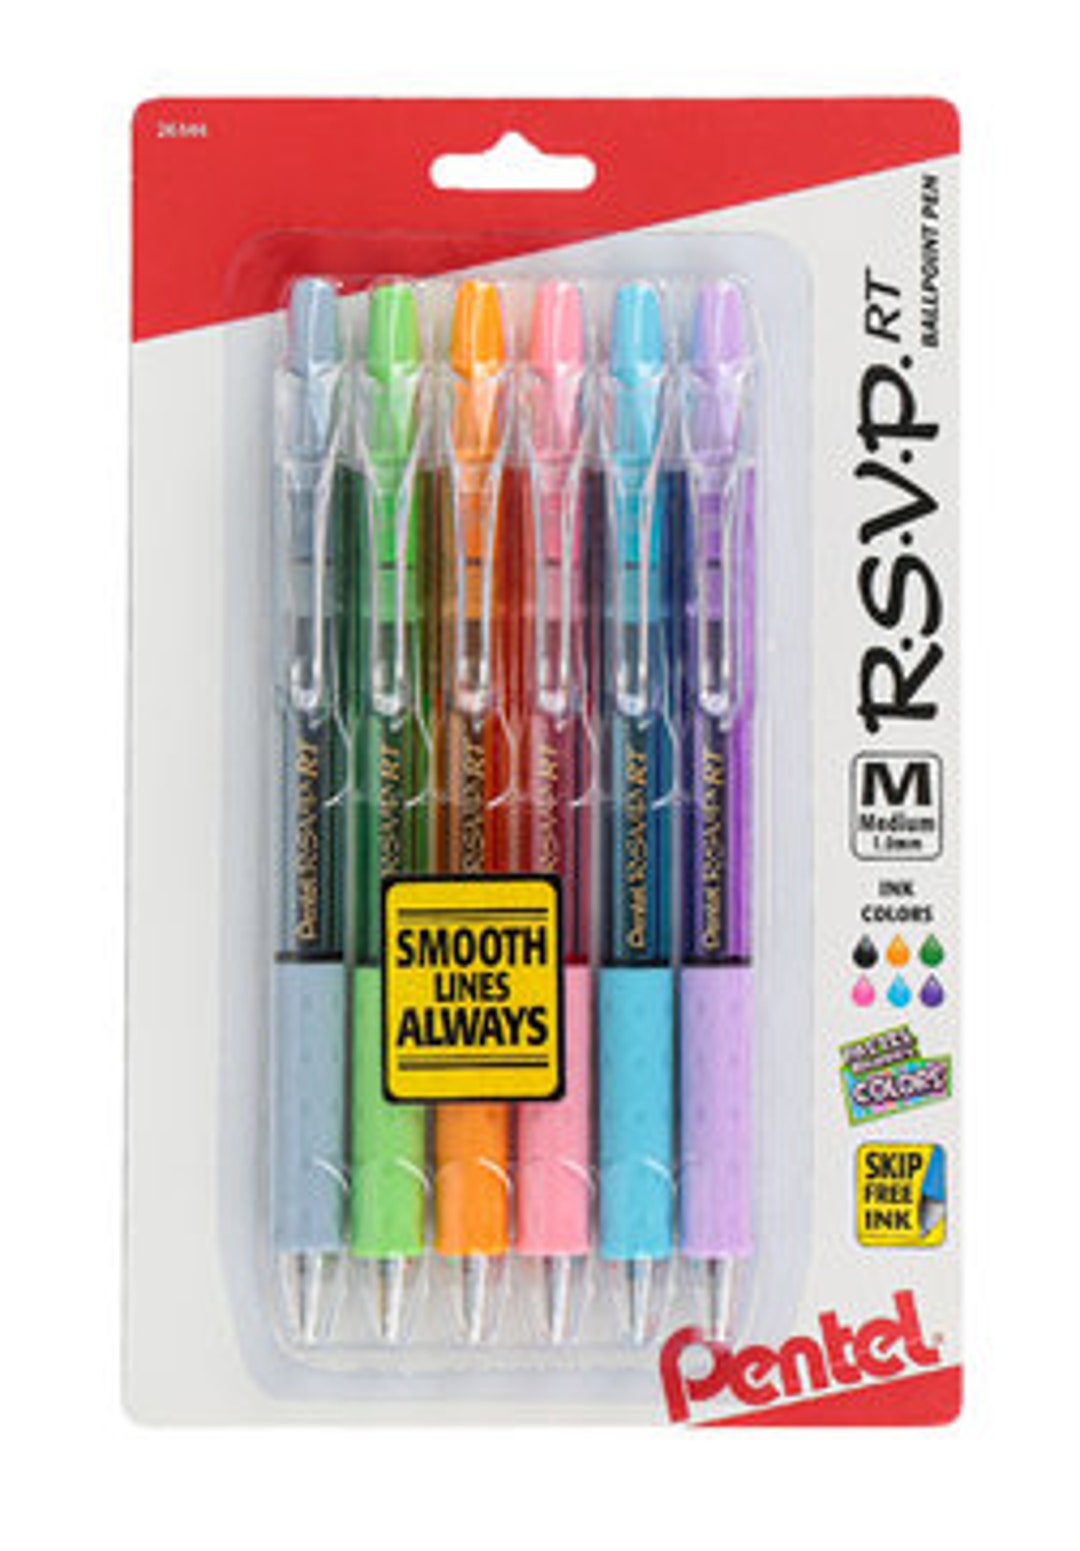 R.S.V.P.® Ballpoint Pens, 5 Pack Assorted Colors